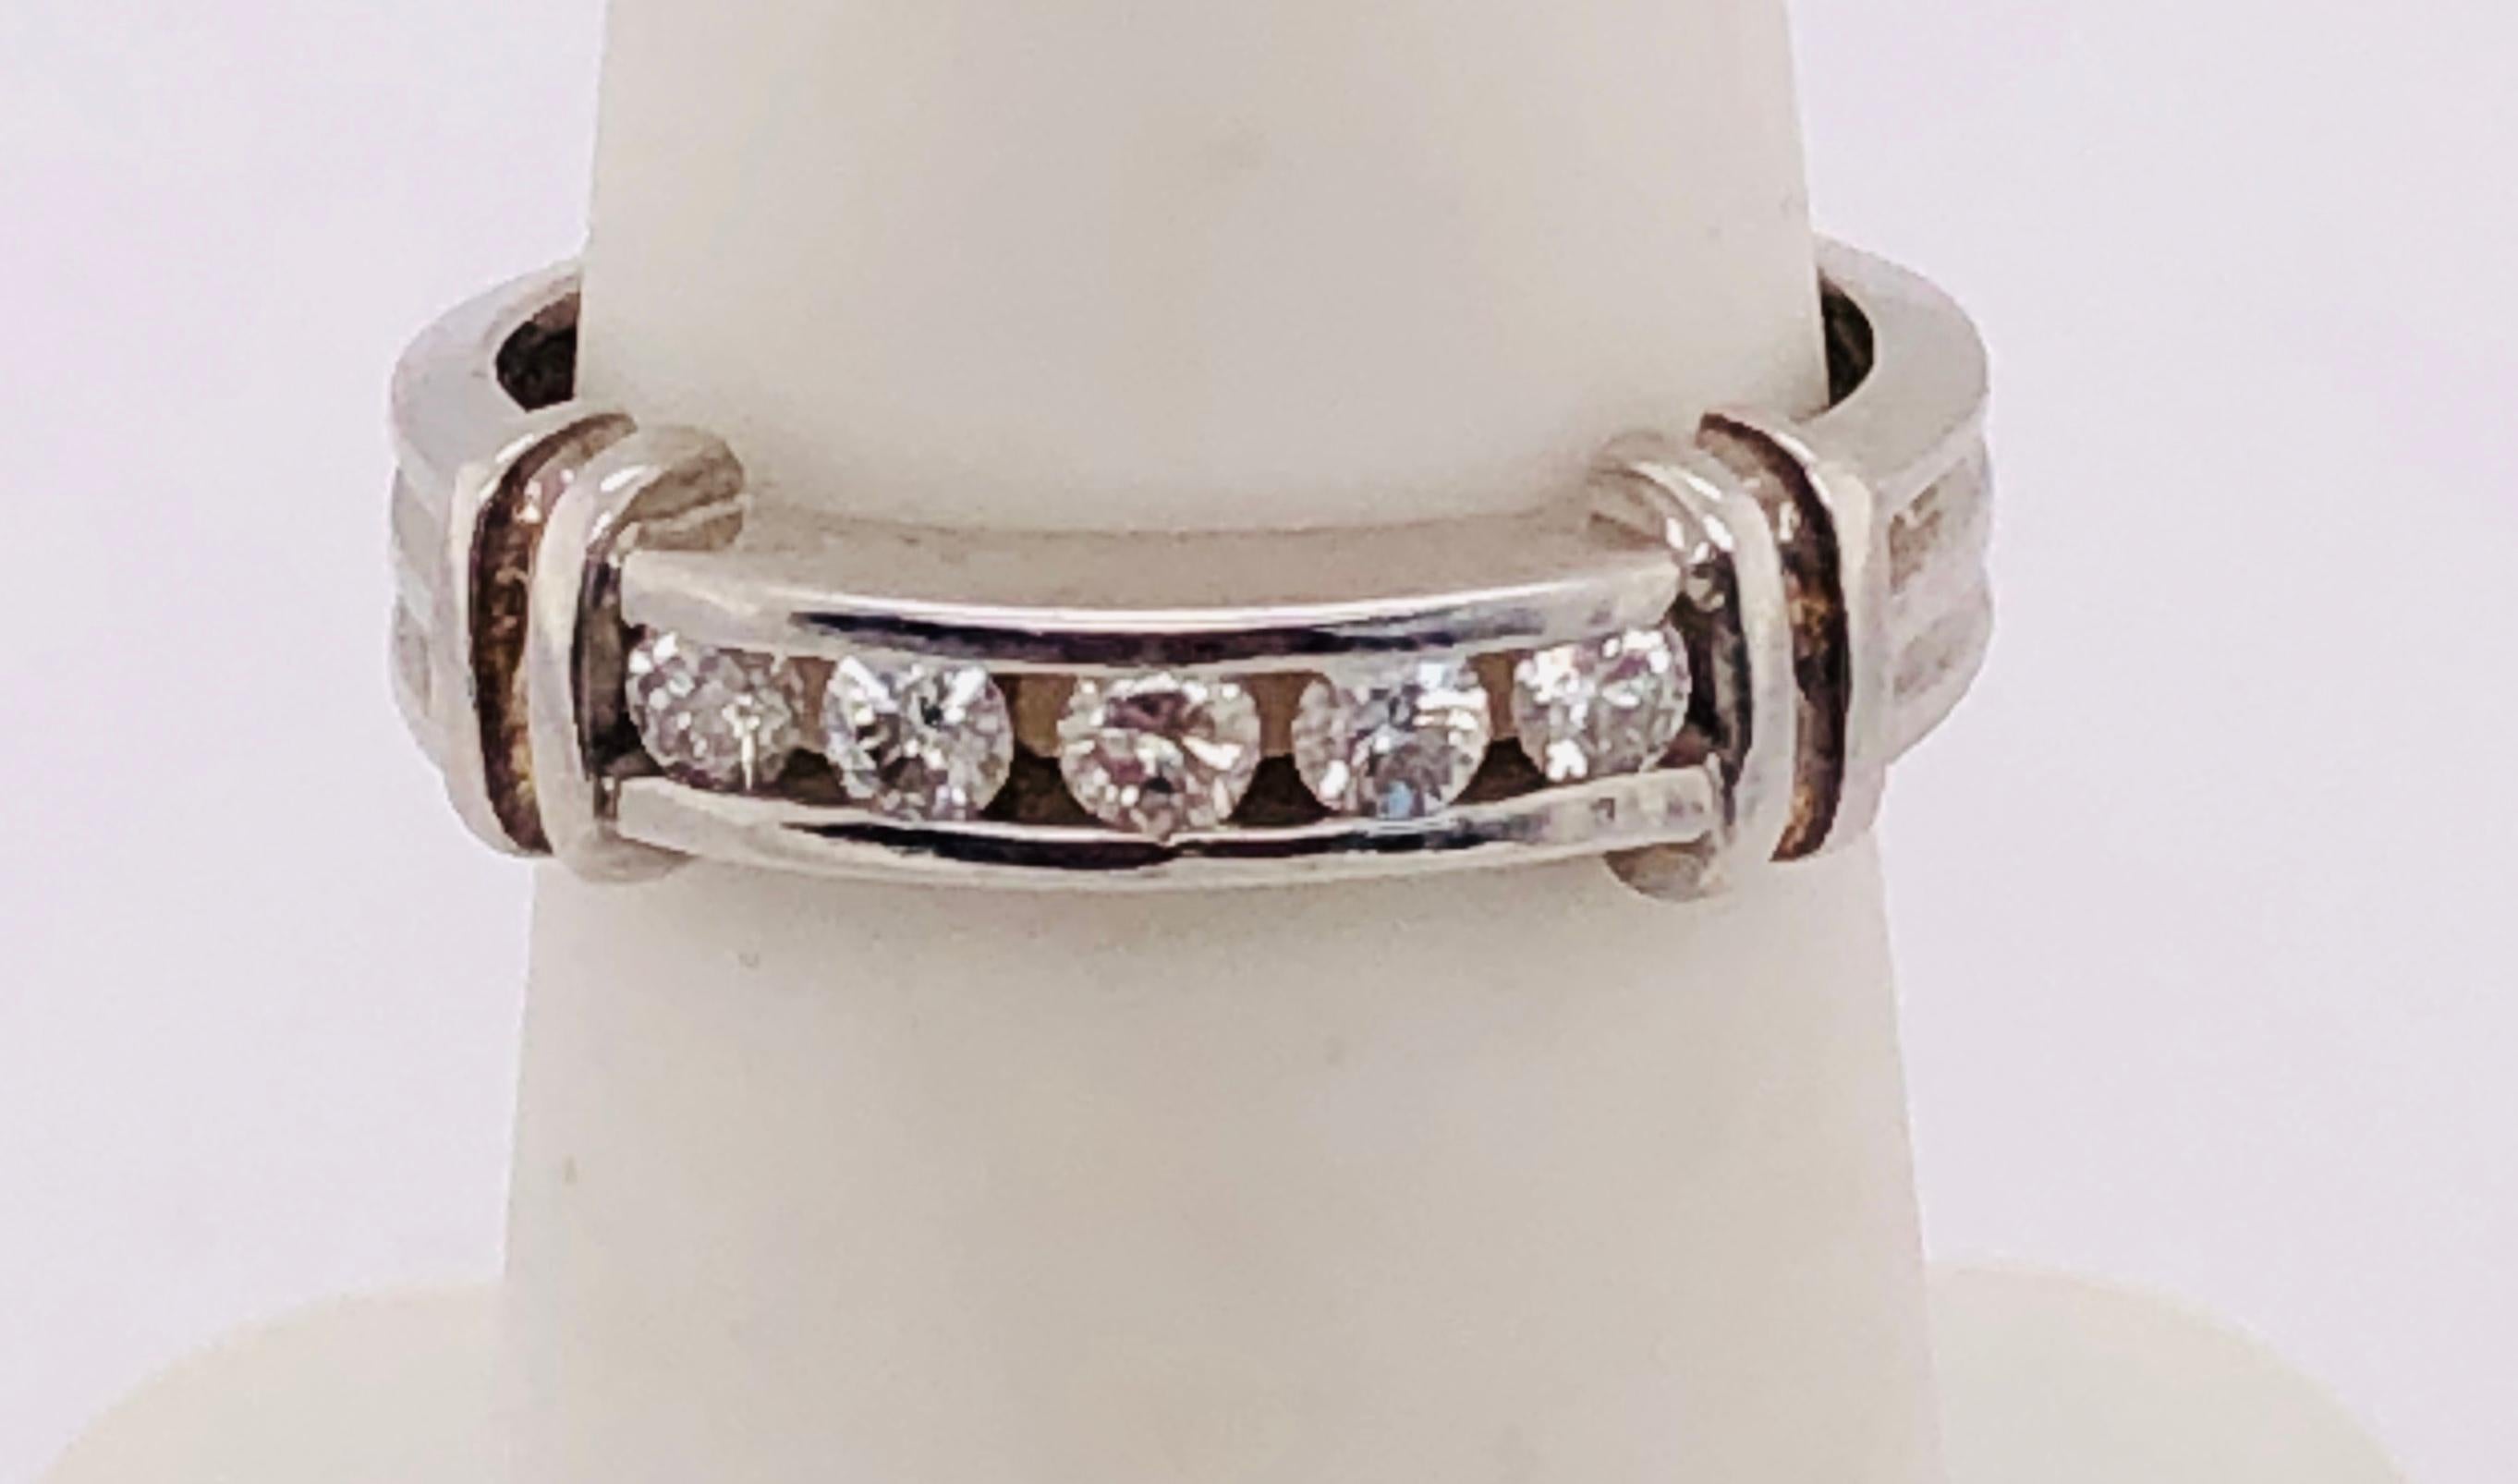 14Kt White Gold Channel Set Ring with Diamonds 0.23 Total Diamond Weight
Size 5 
2.90 grams Total weight